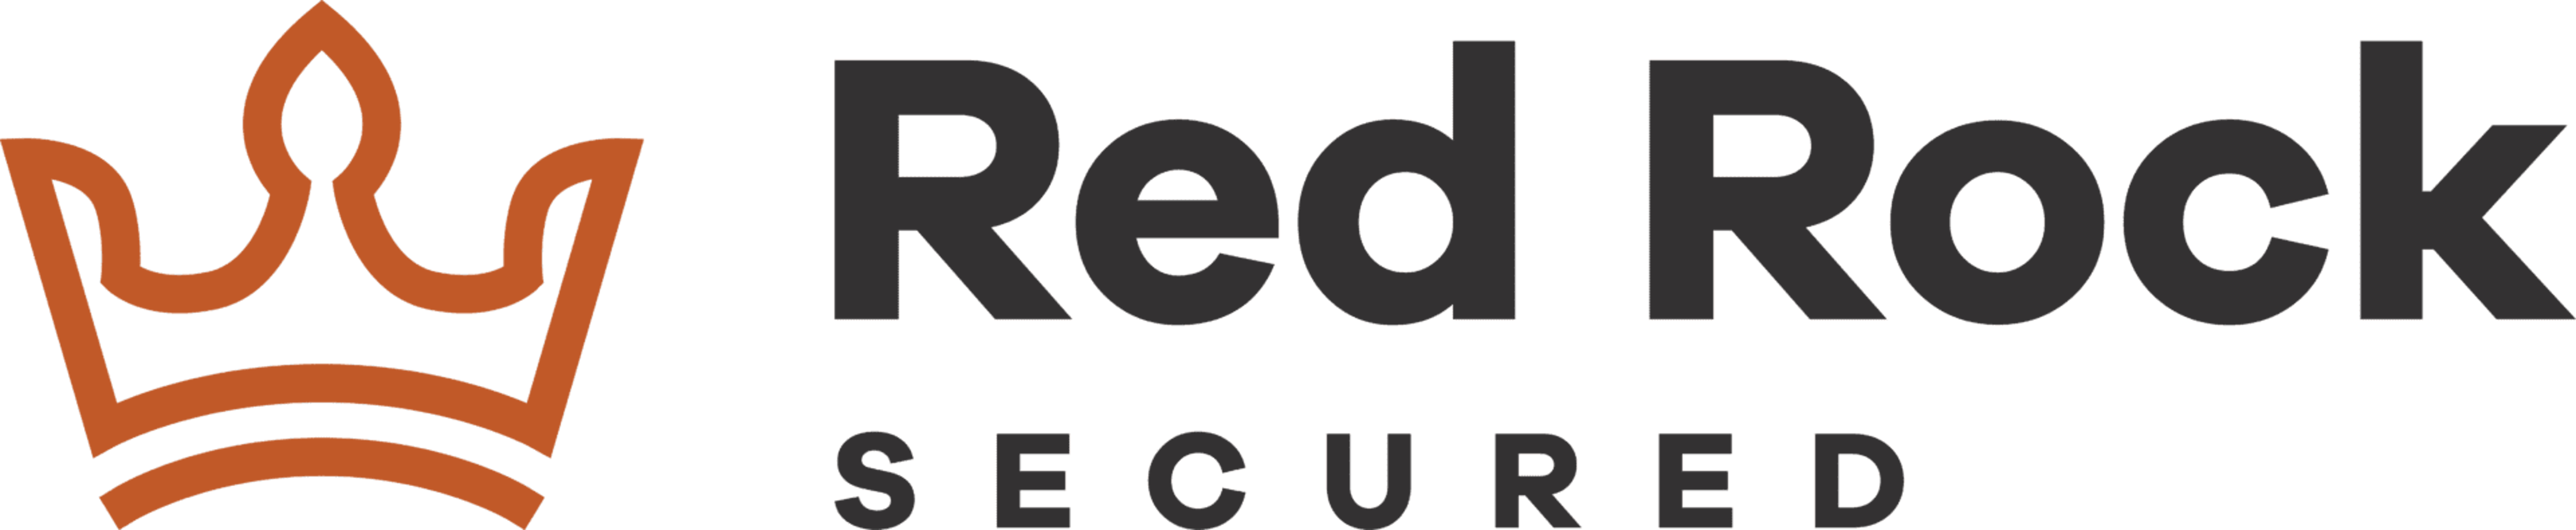 Red Rock Secured Review